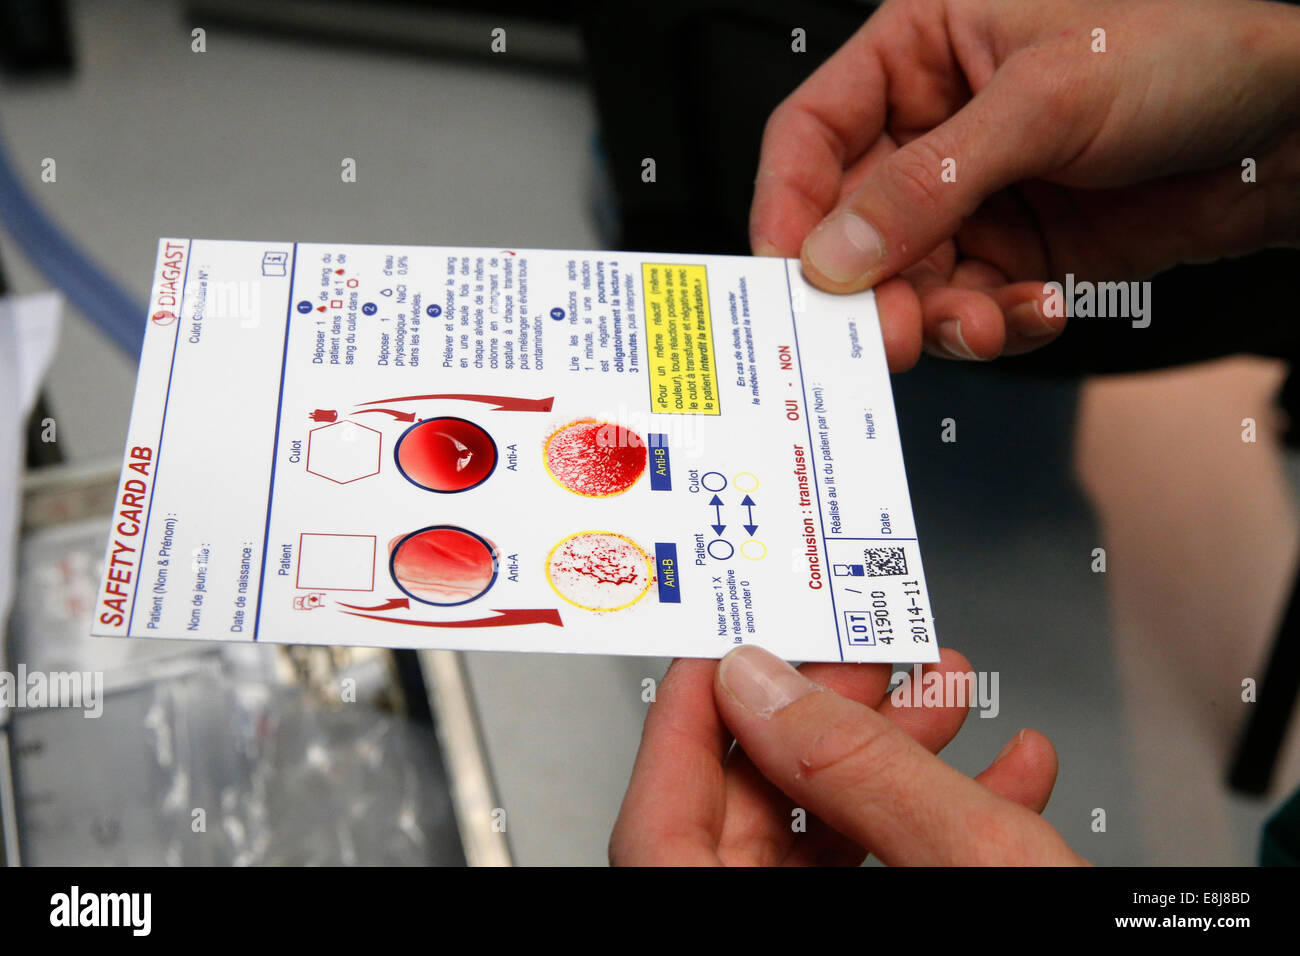 Blood bag for transfusion. AB blood type security card. Stock Photo